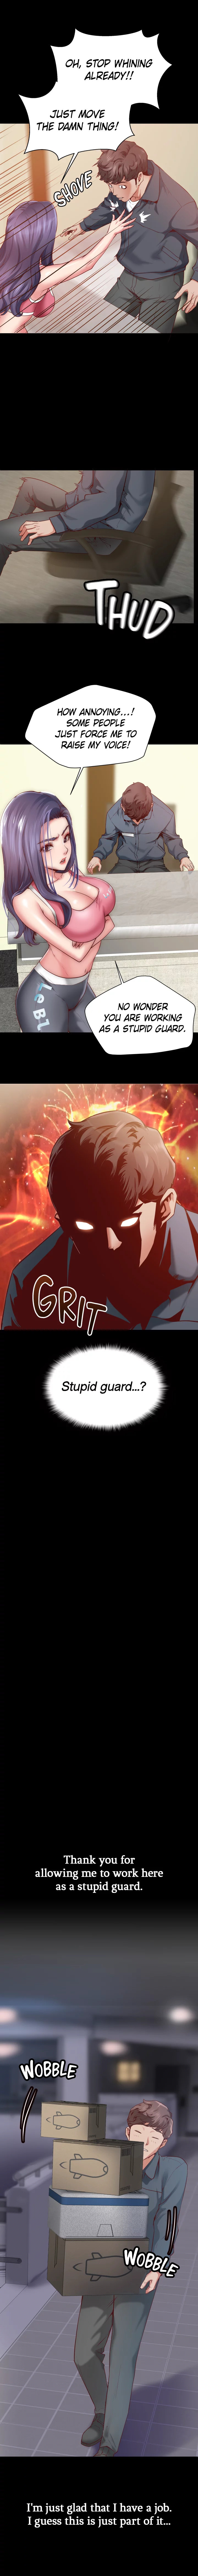 Wrath of the Underdog - Chapter 1 Page 4